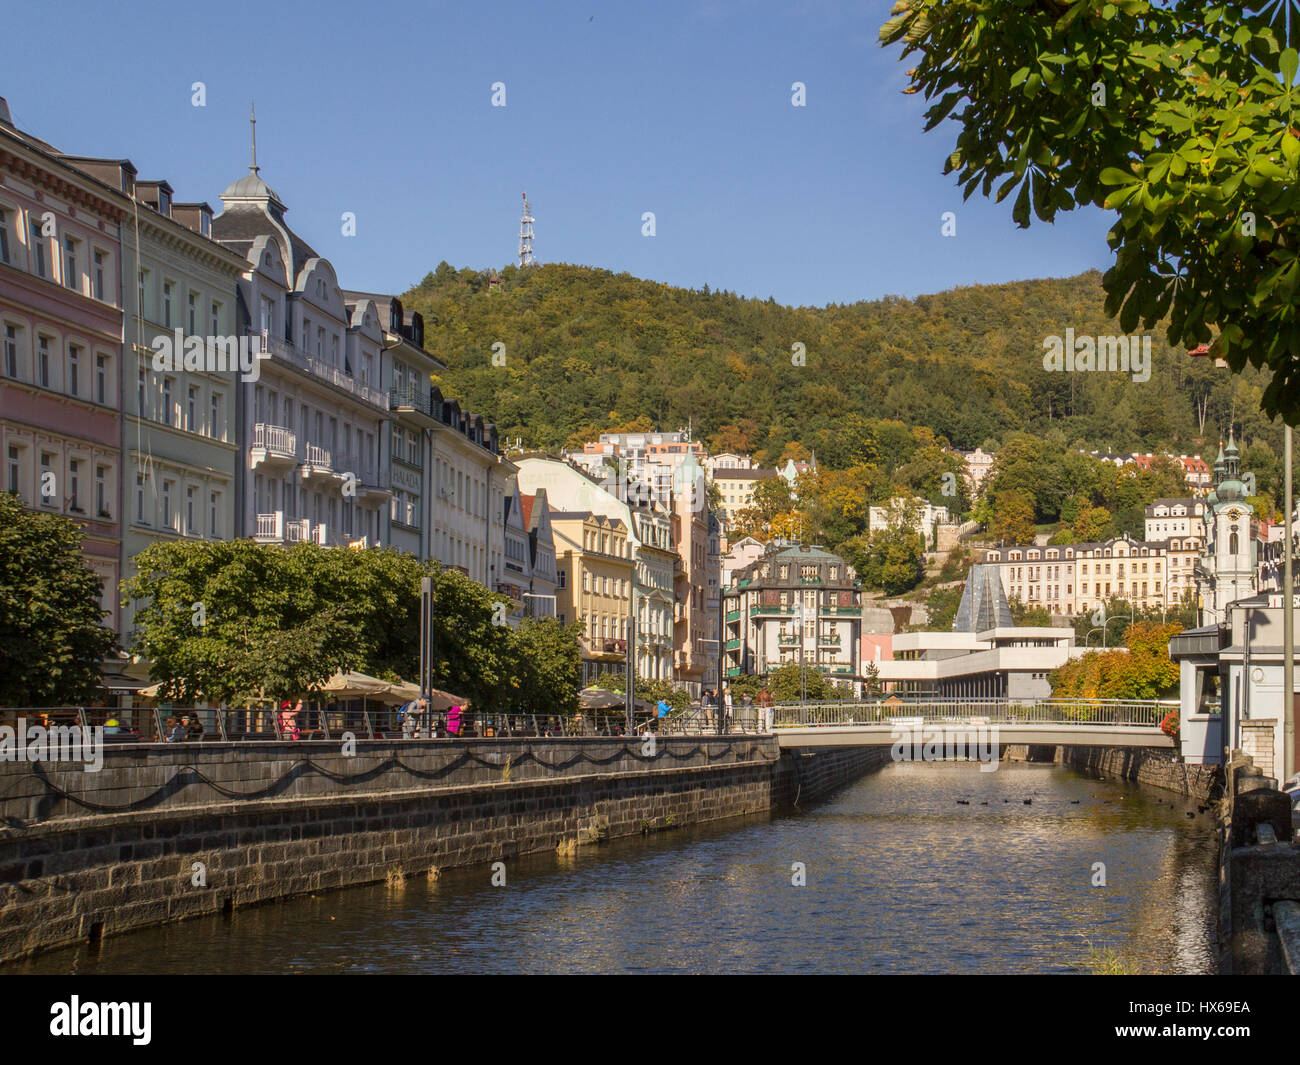 Karlovy Vary,Czech Republic - October 01: Tepla river Promenade on  October 01, 2015 in Karlovy Vary. Karlovy Vary historically famous for its hot spr Stock Photo